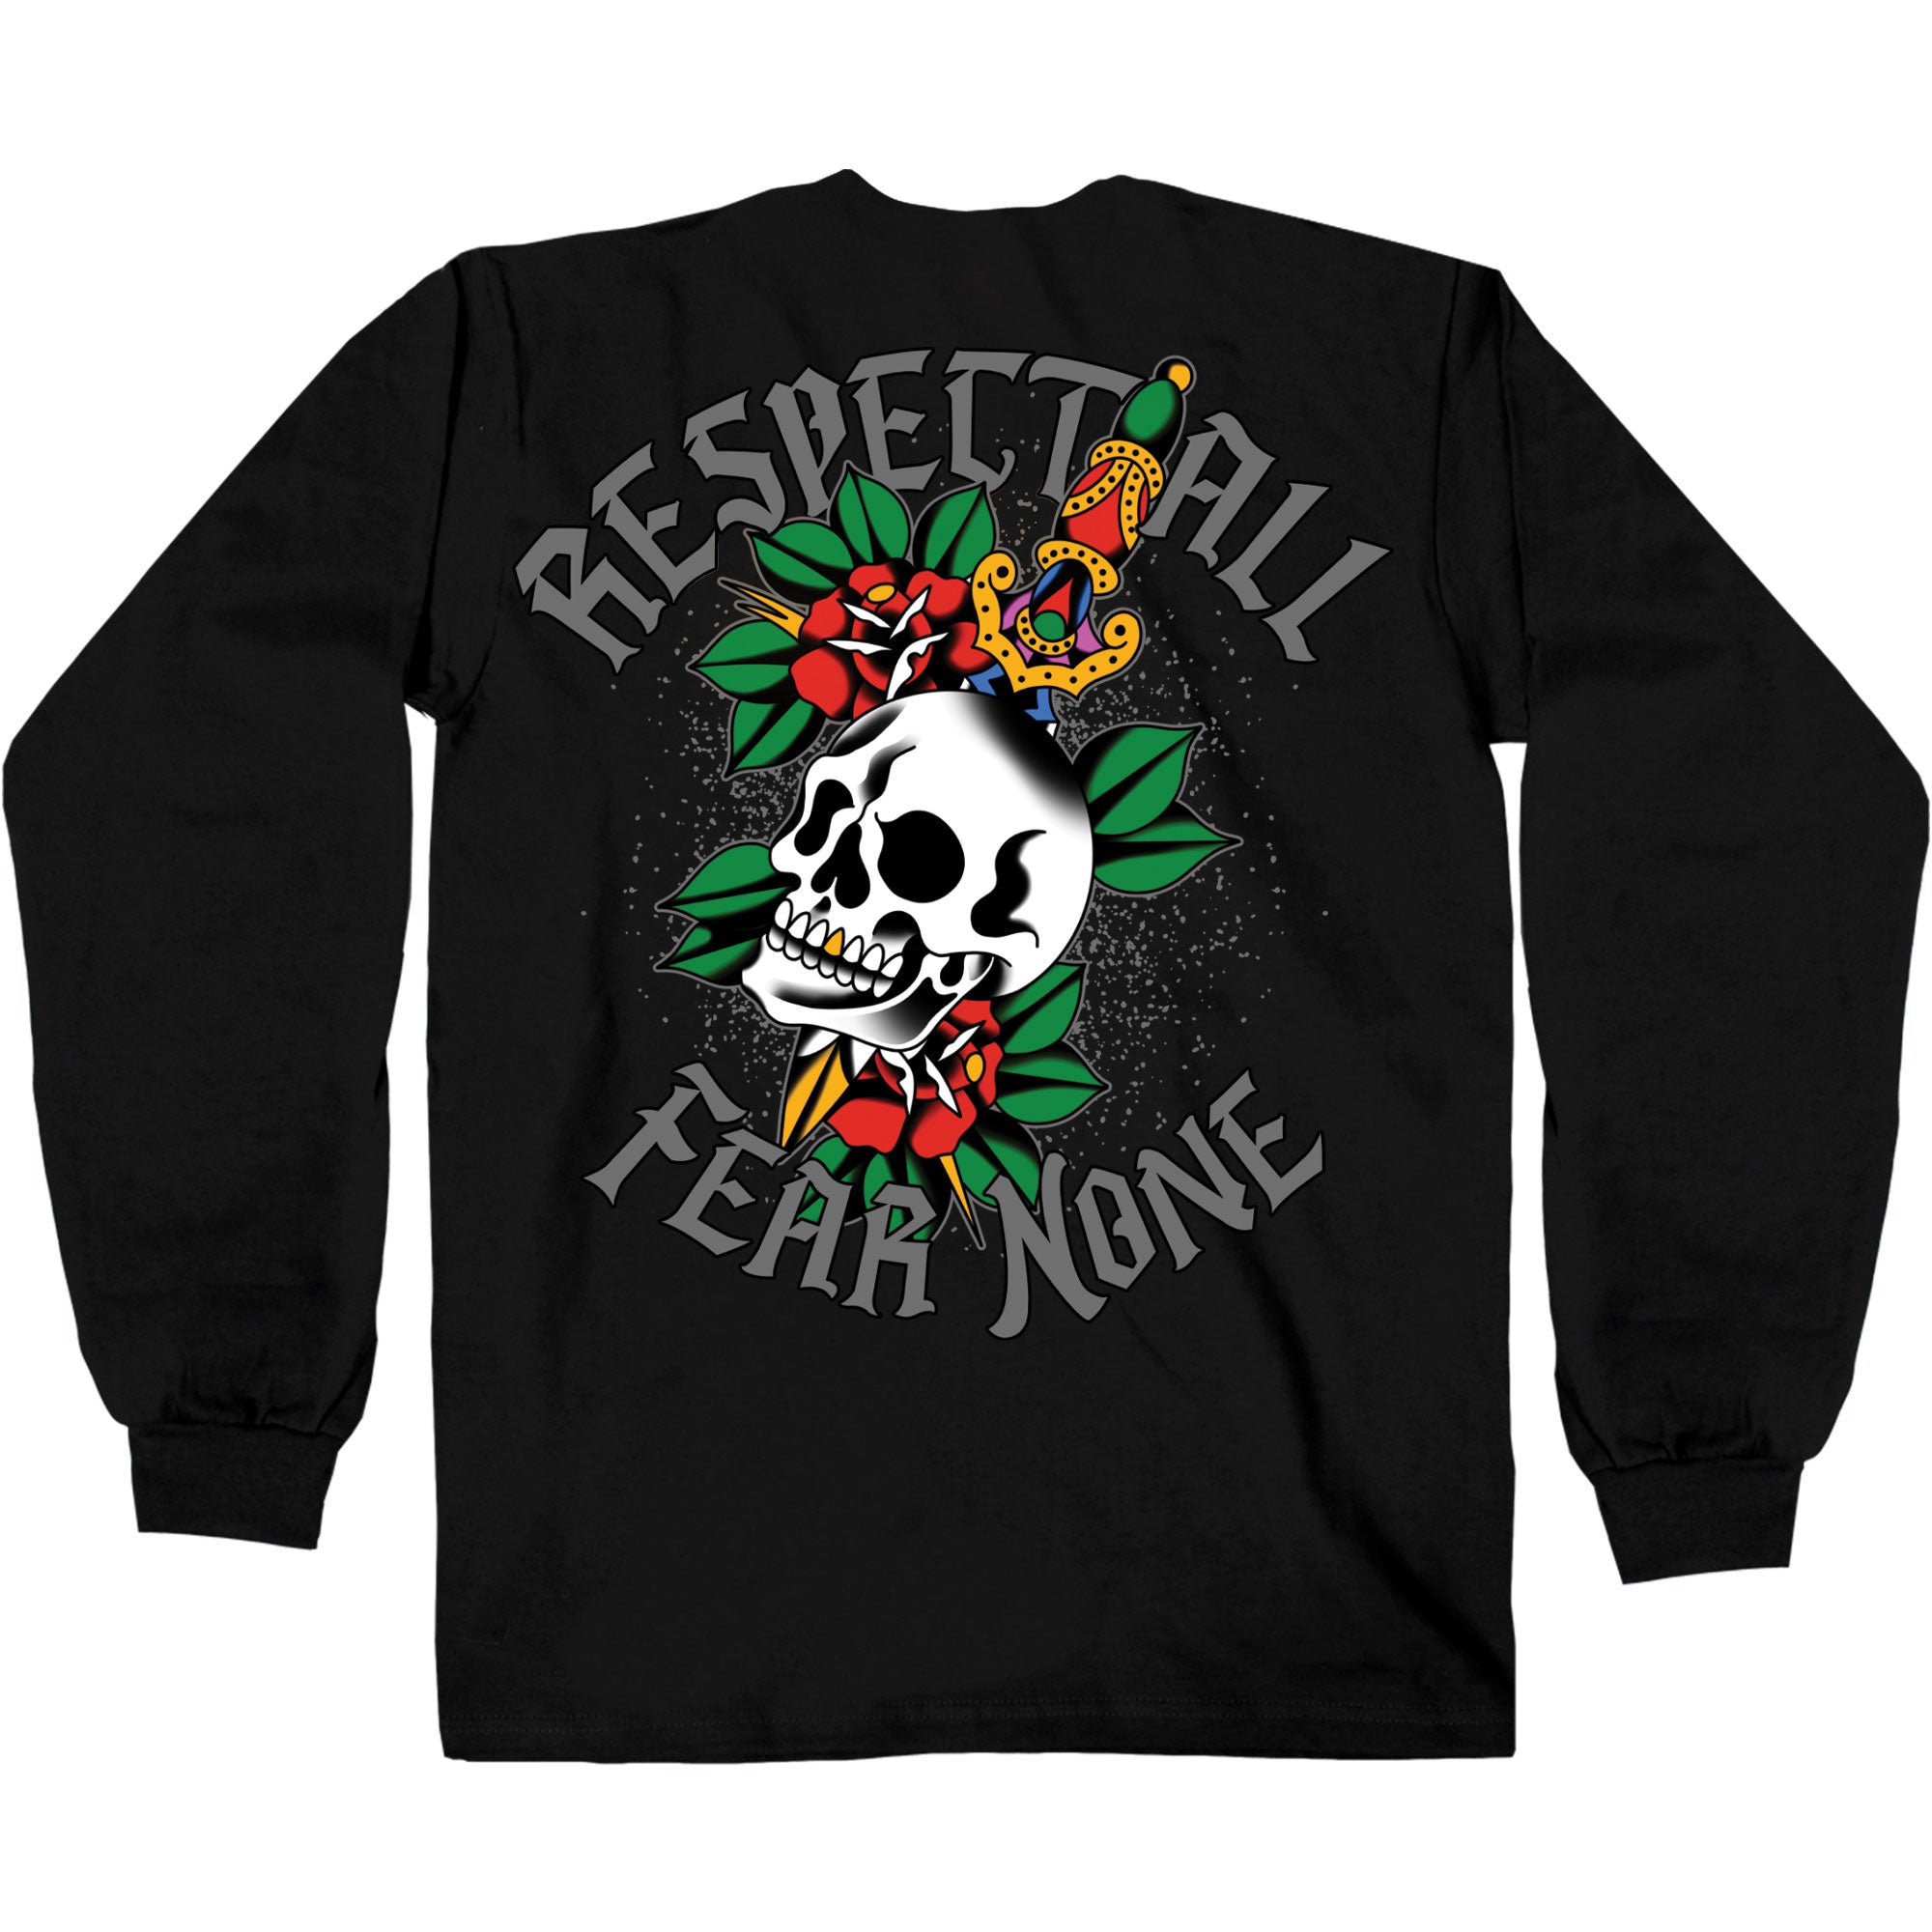 Hot Leathers GMD2514 Men's Black Respect All Fear None Long Sleeve T-Shirt